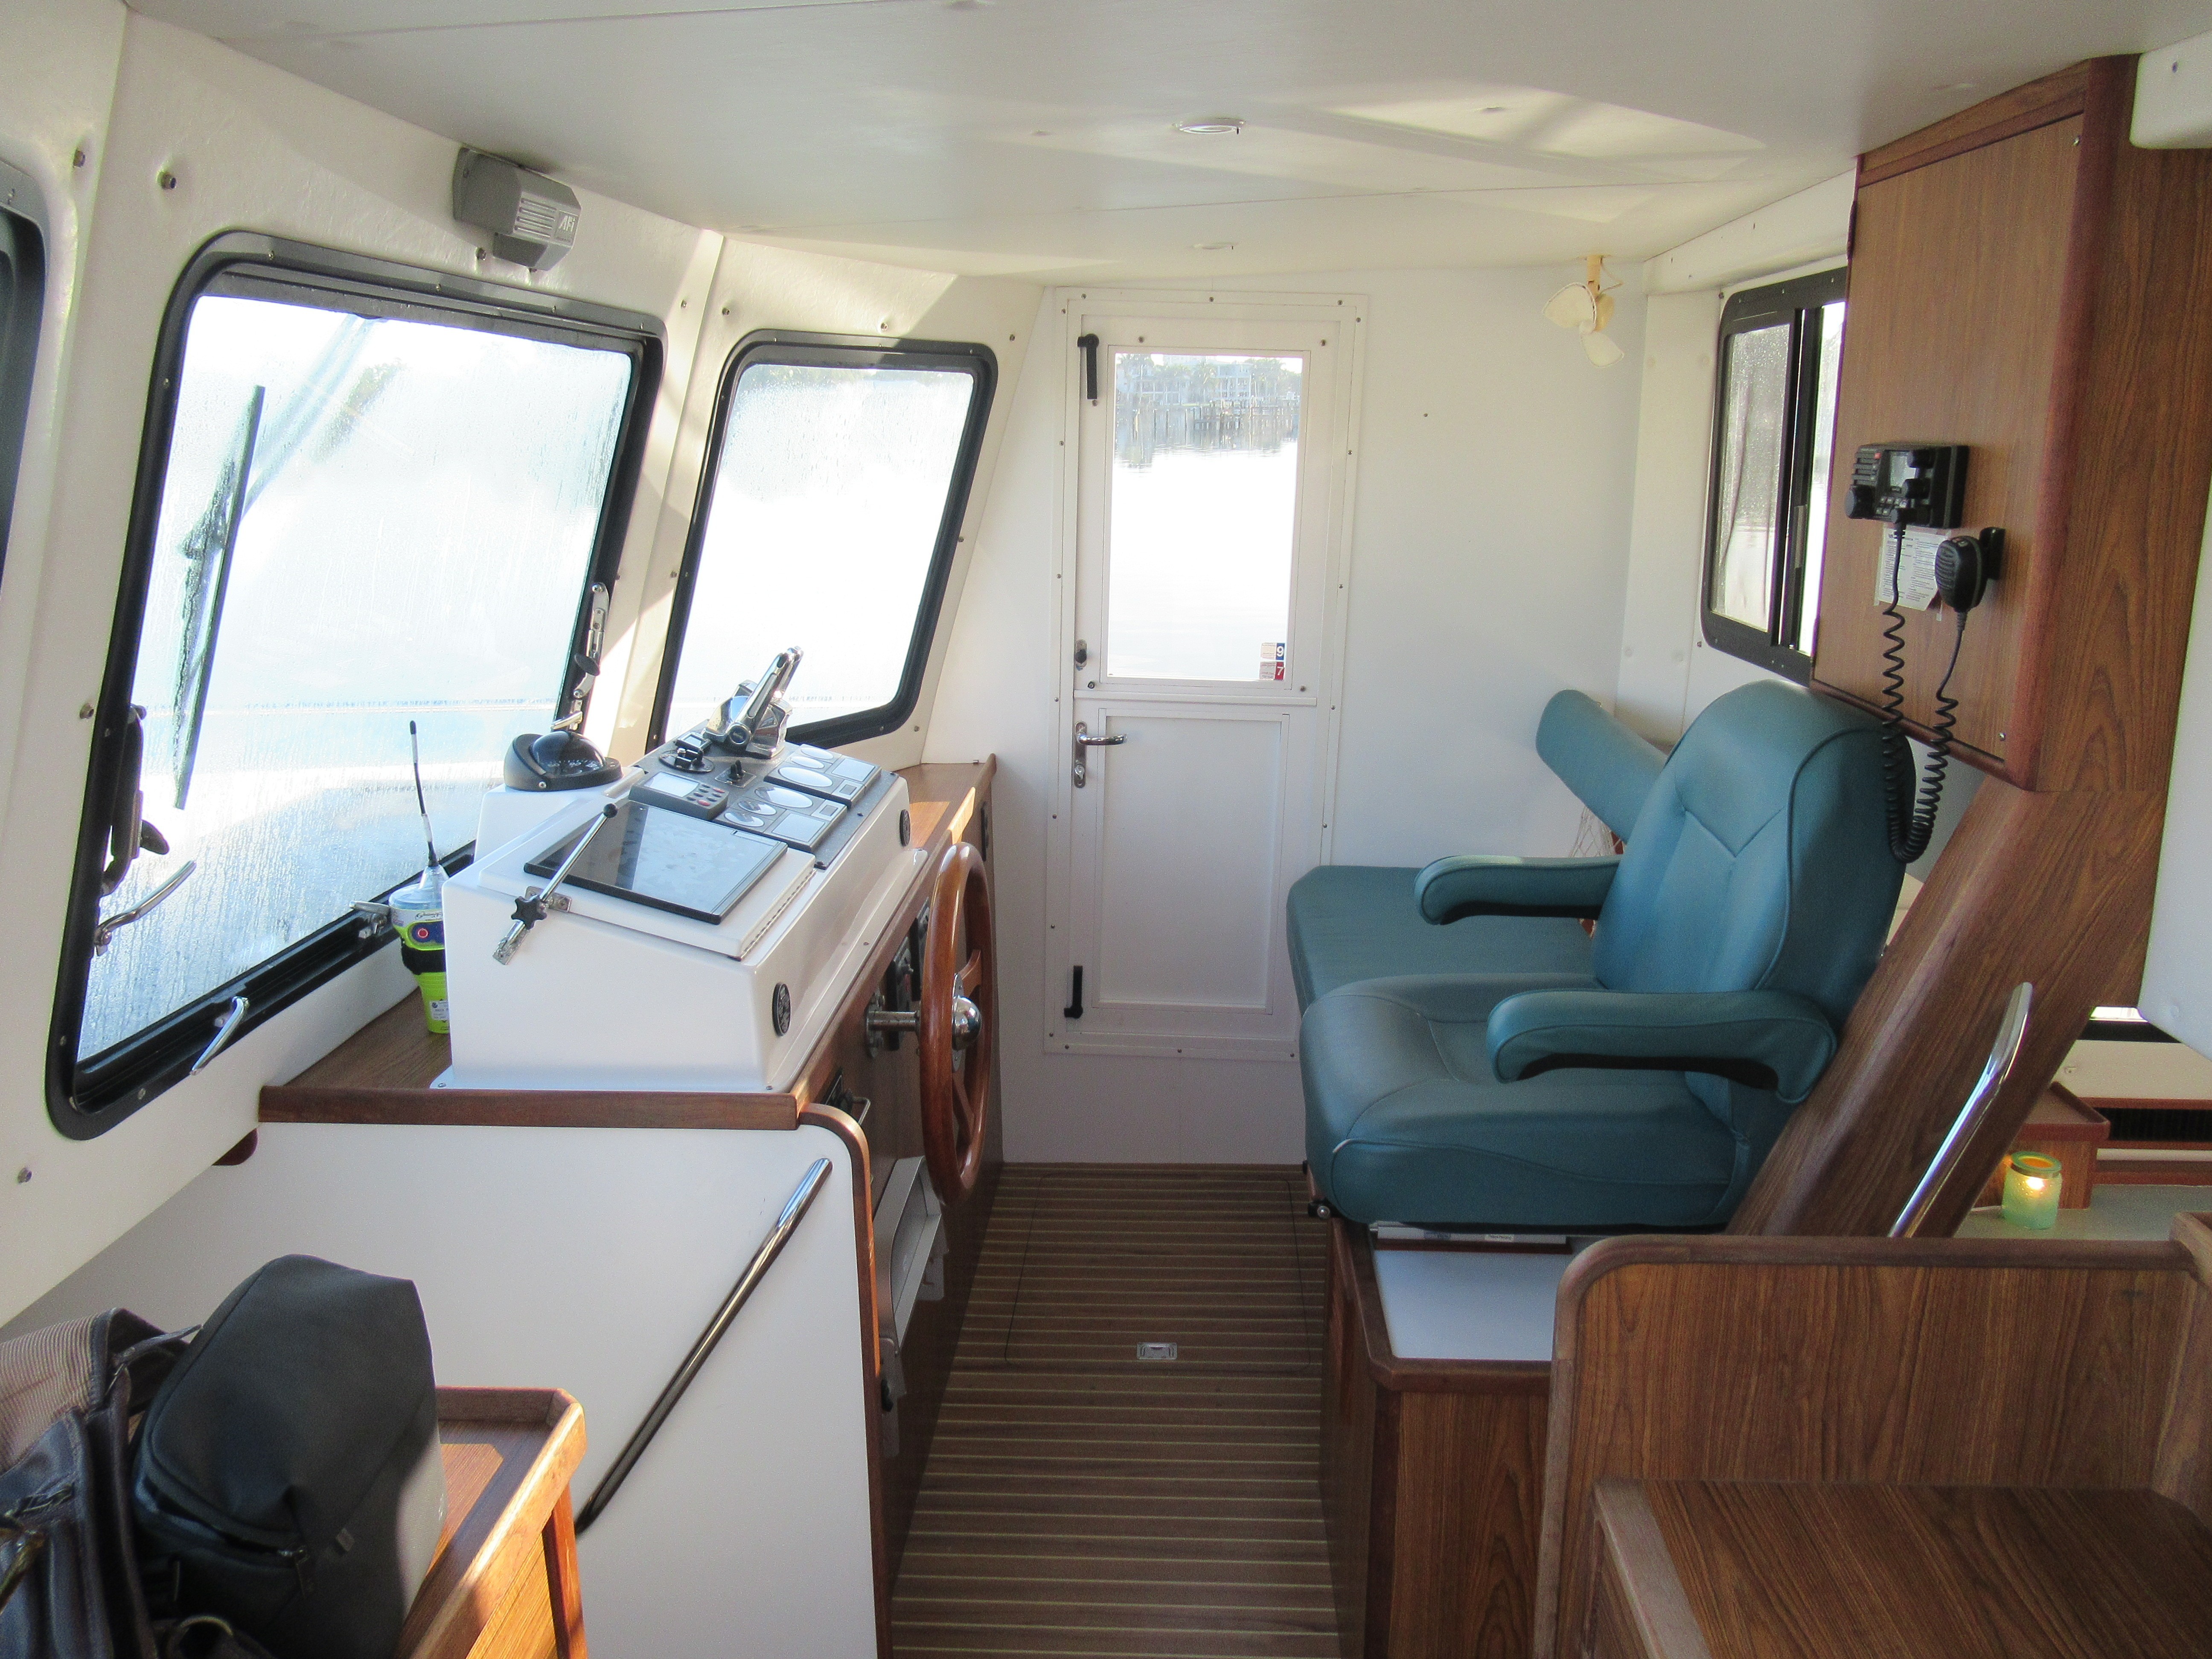 Used Sail Catamaran for Sale 2006 40 Cruiser Layout & Accommodations